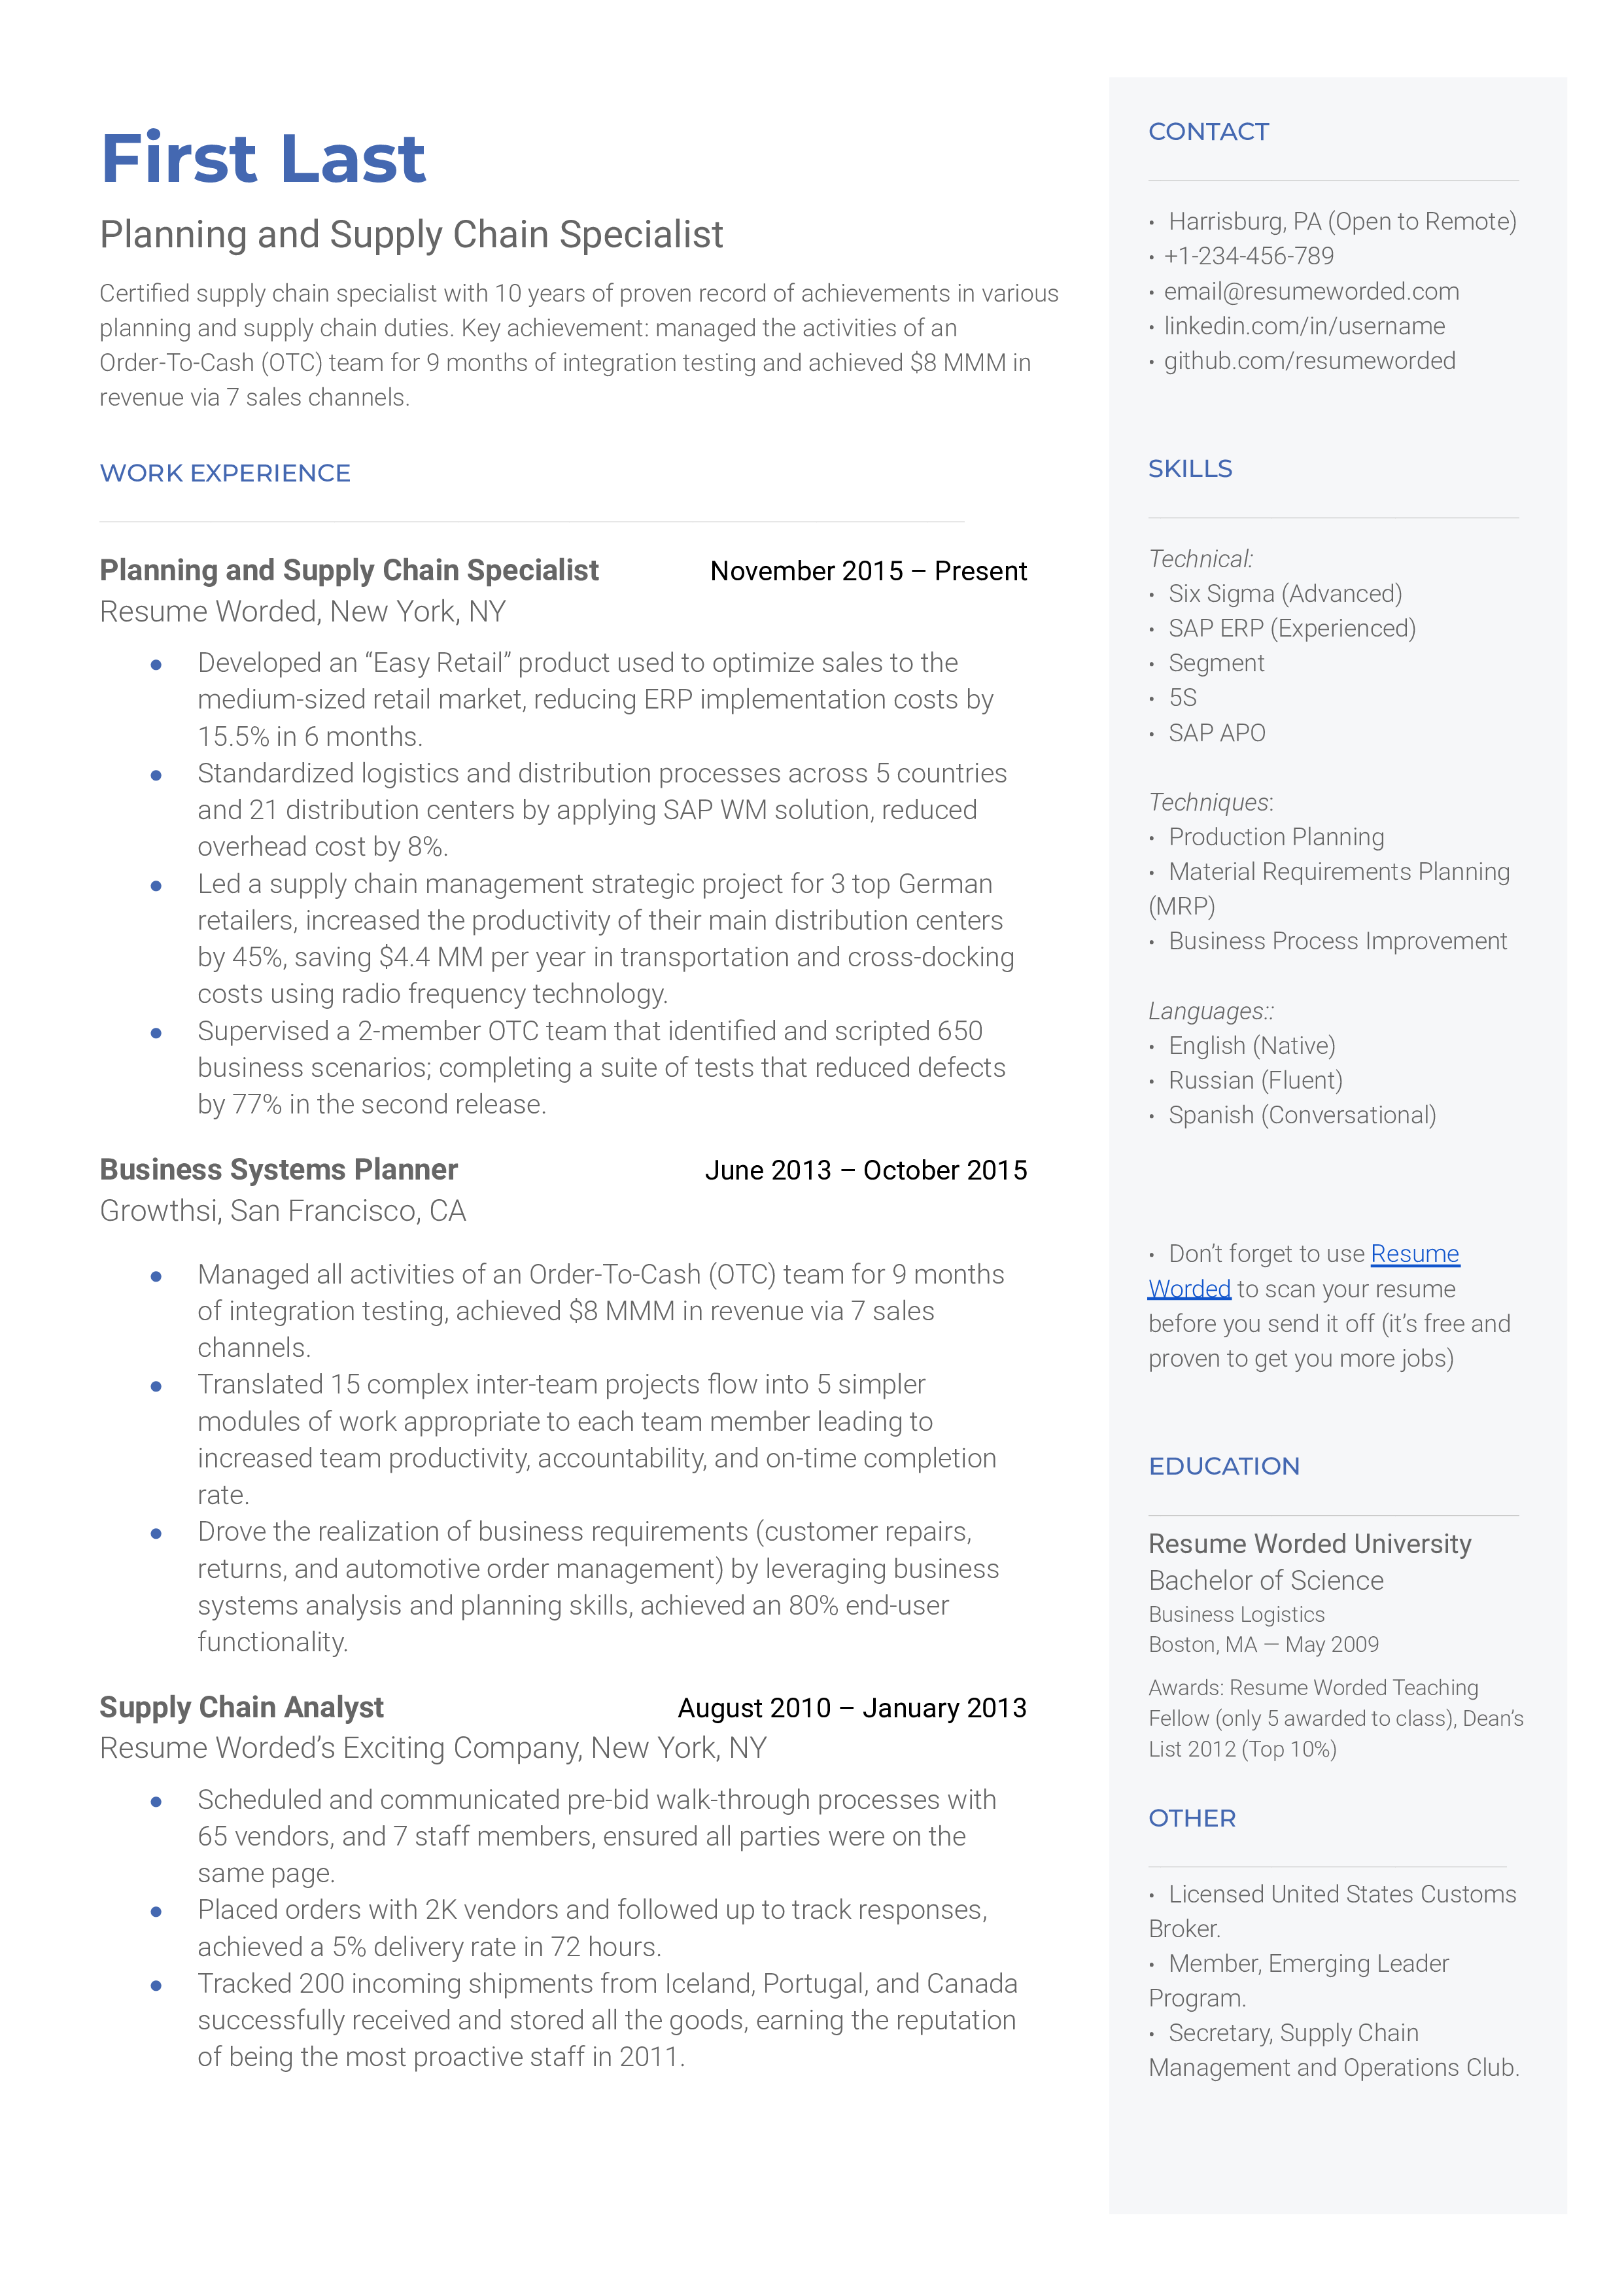 Planning and Supply Chain Specialist Resume Template + Example